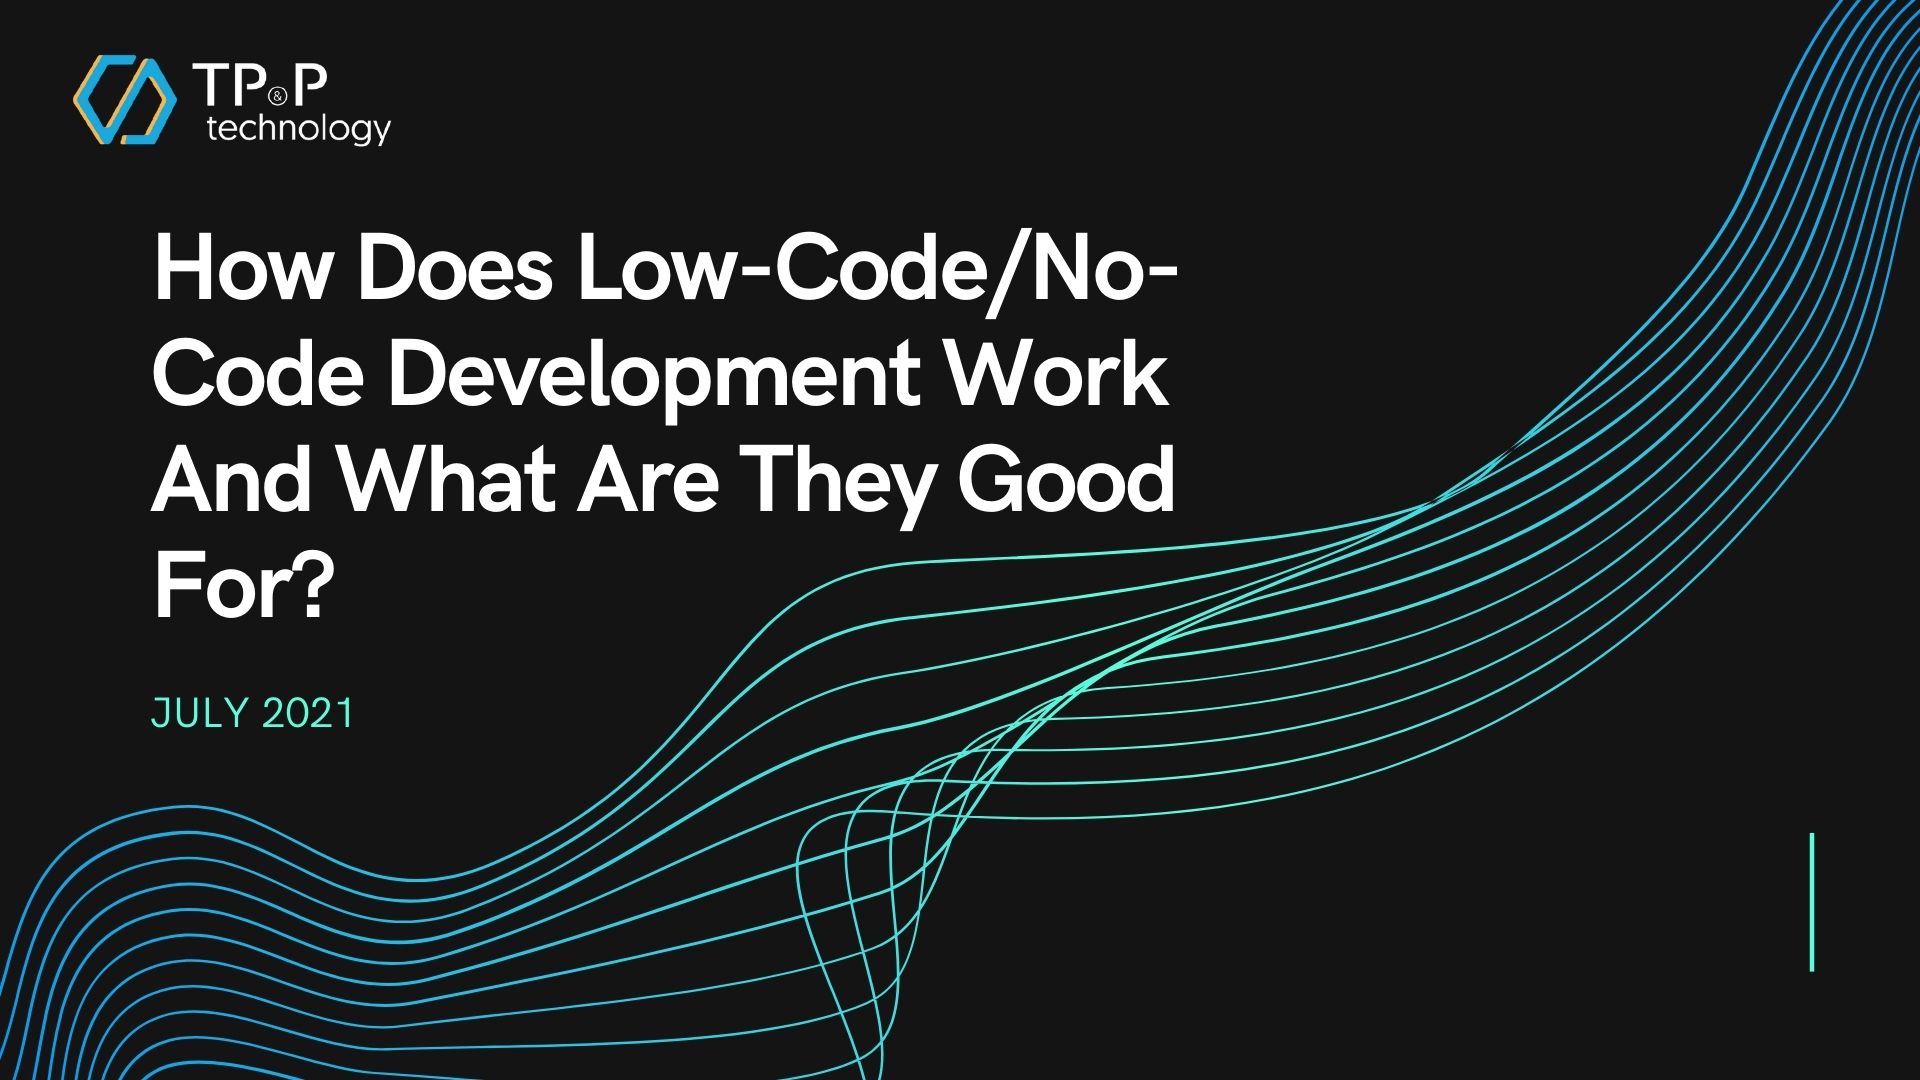 How Does Low-Code/No-Code Development Work And What Are They Good For?